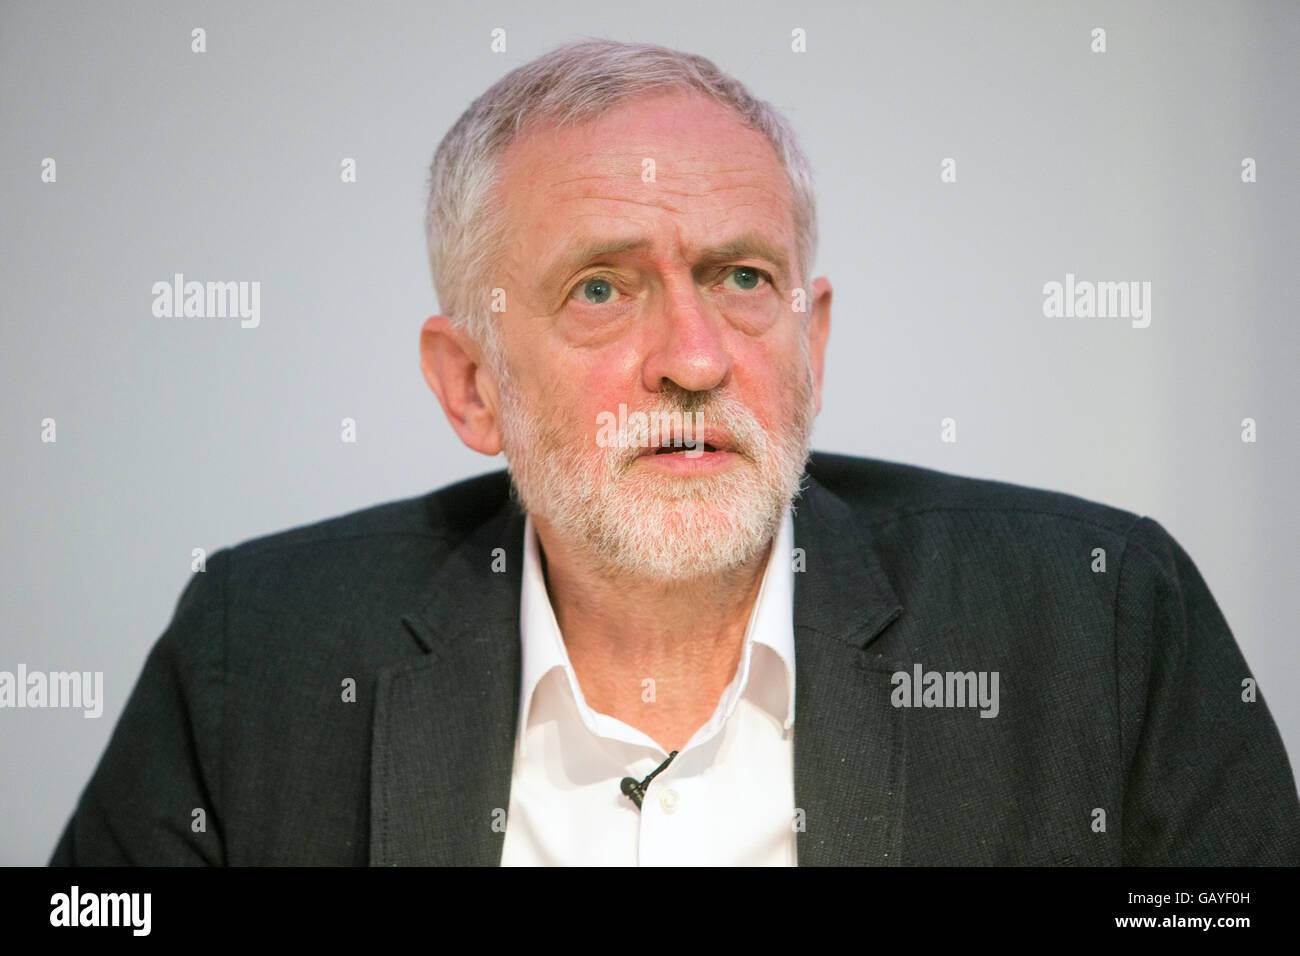 Labour leader,Jeremy Corbyn,speaking at an event in London Stock Photo